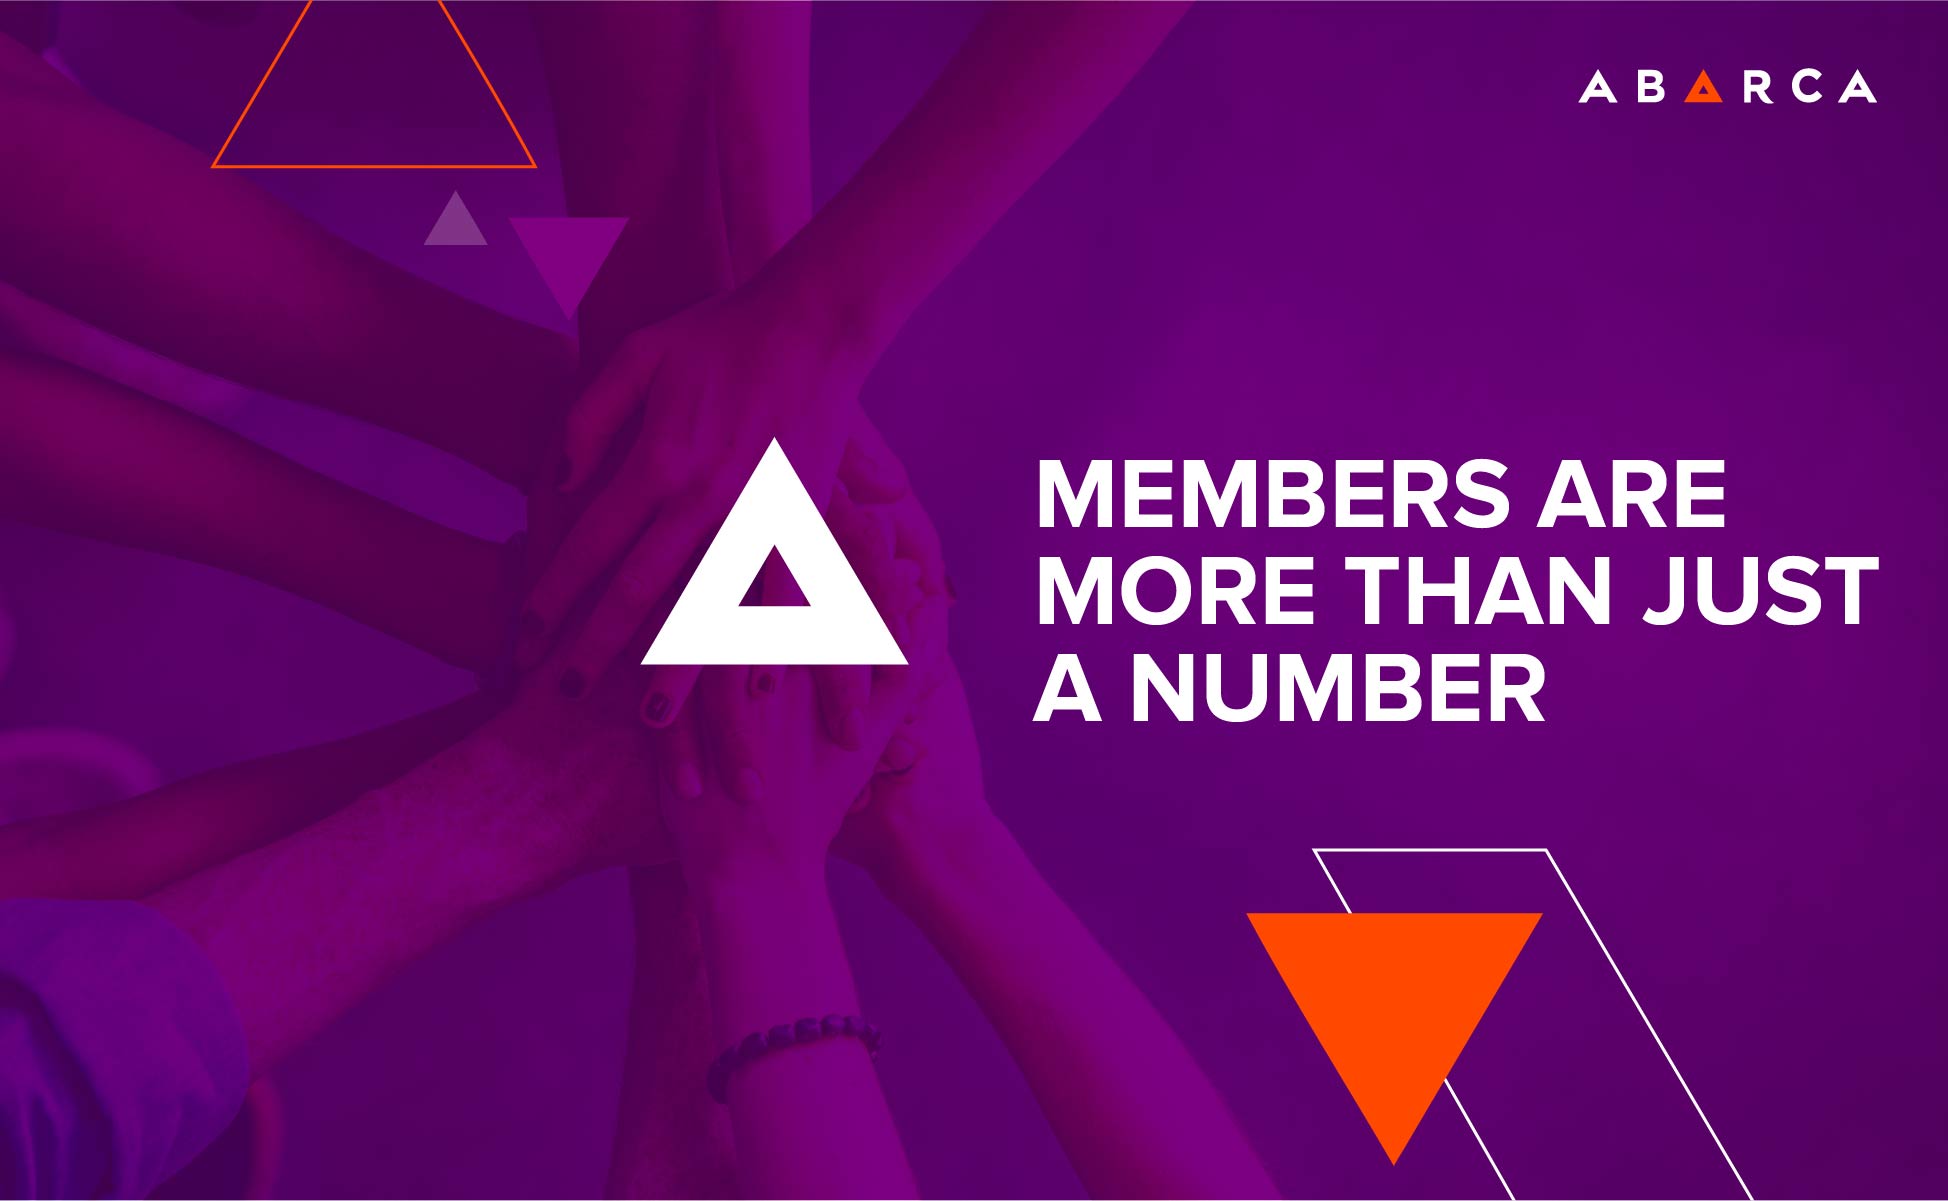 Abarca Health: Members are More than Just a Number